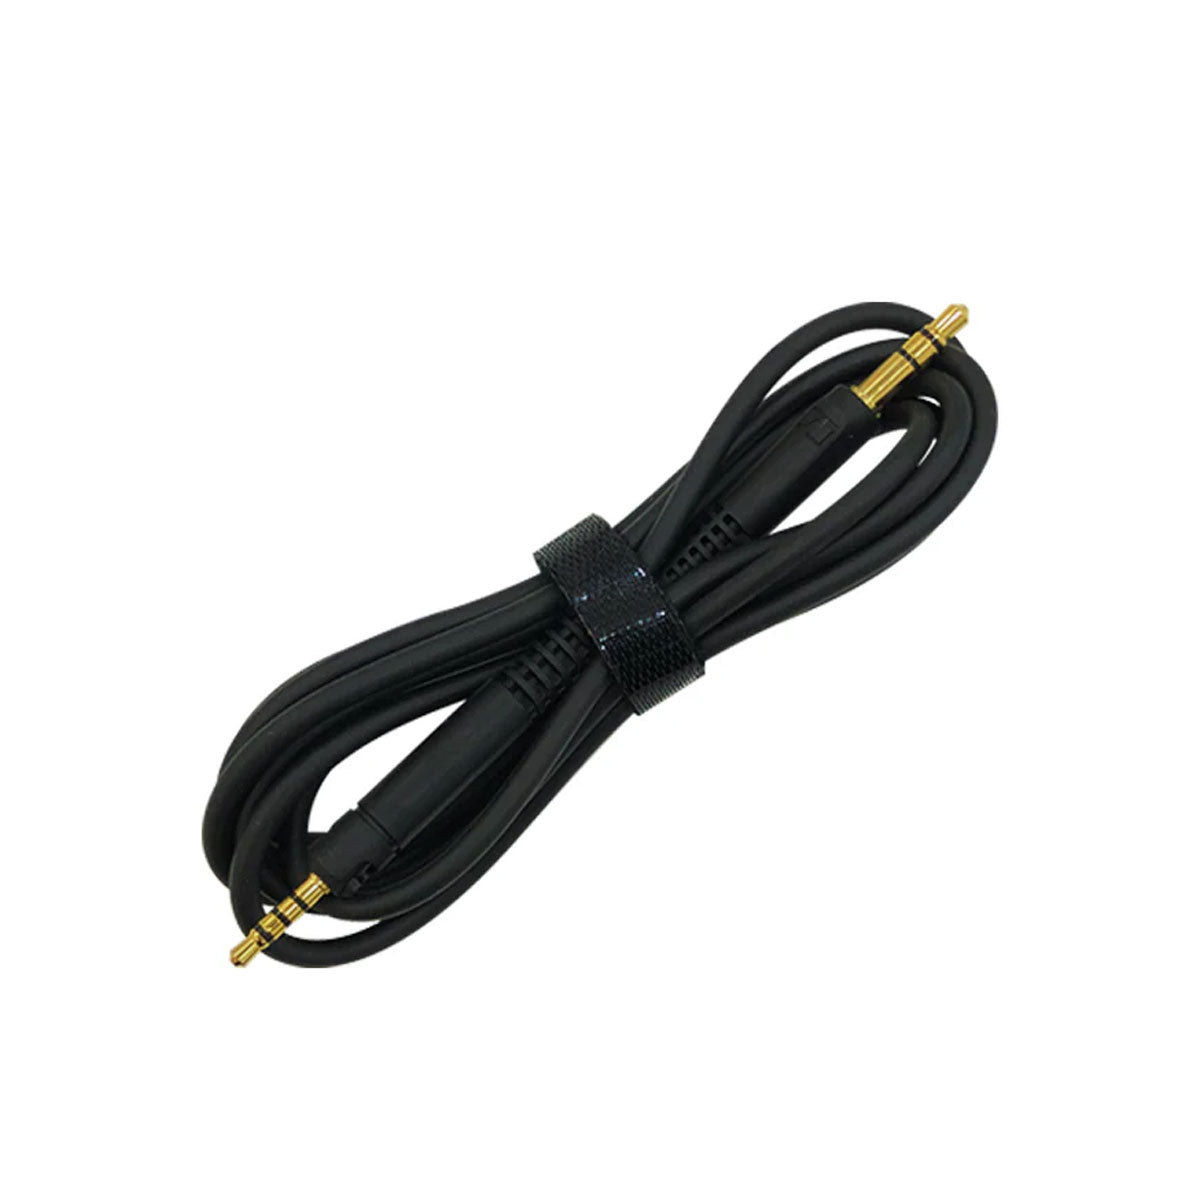 Sennheiser Spares - Connecting Cable, 1.2m with 3.5mm Plug, For HD 599